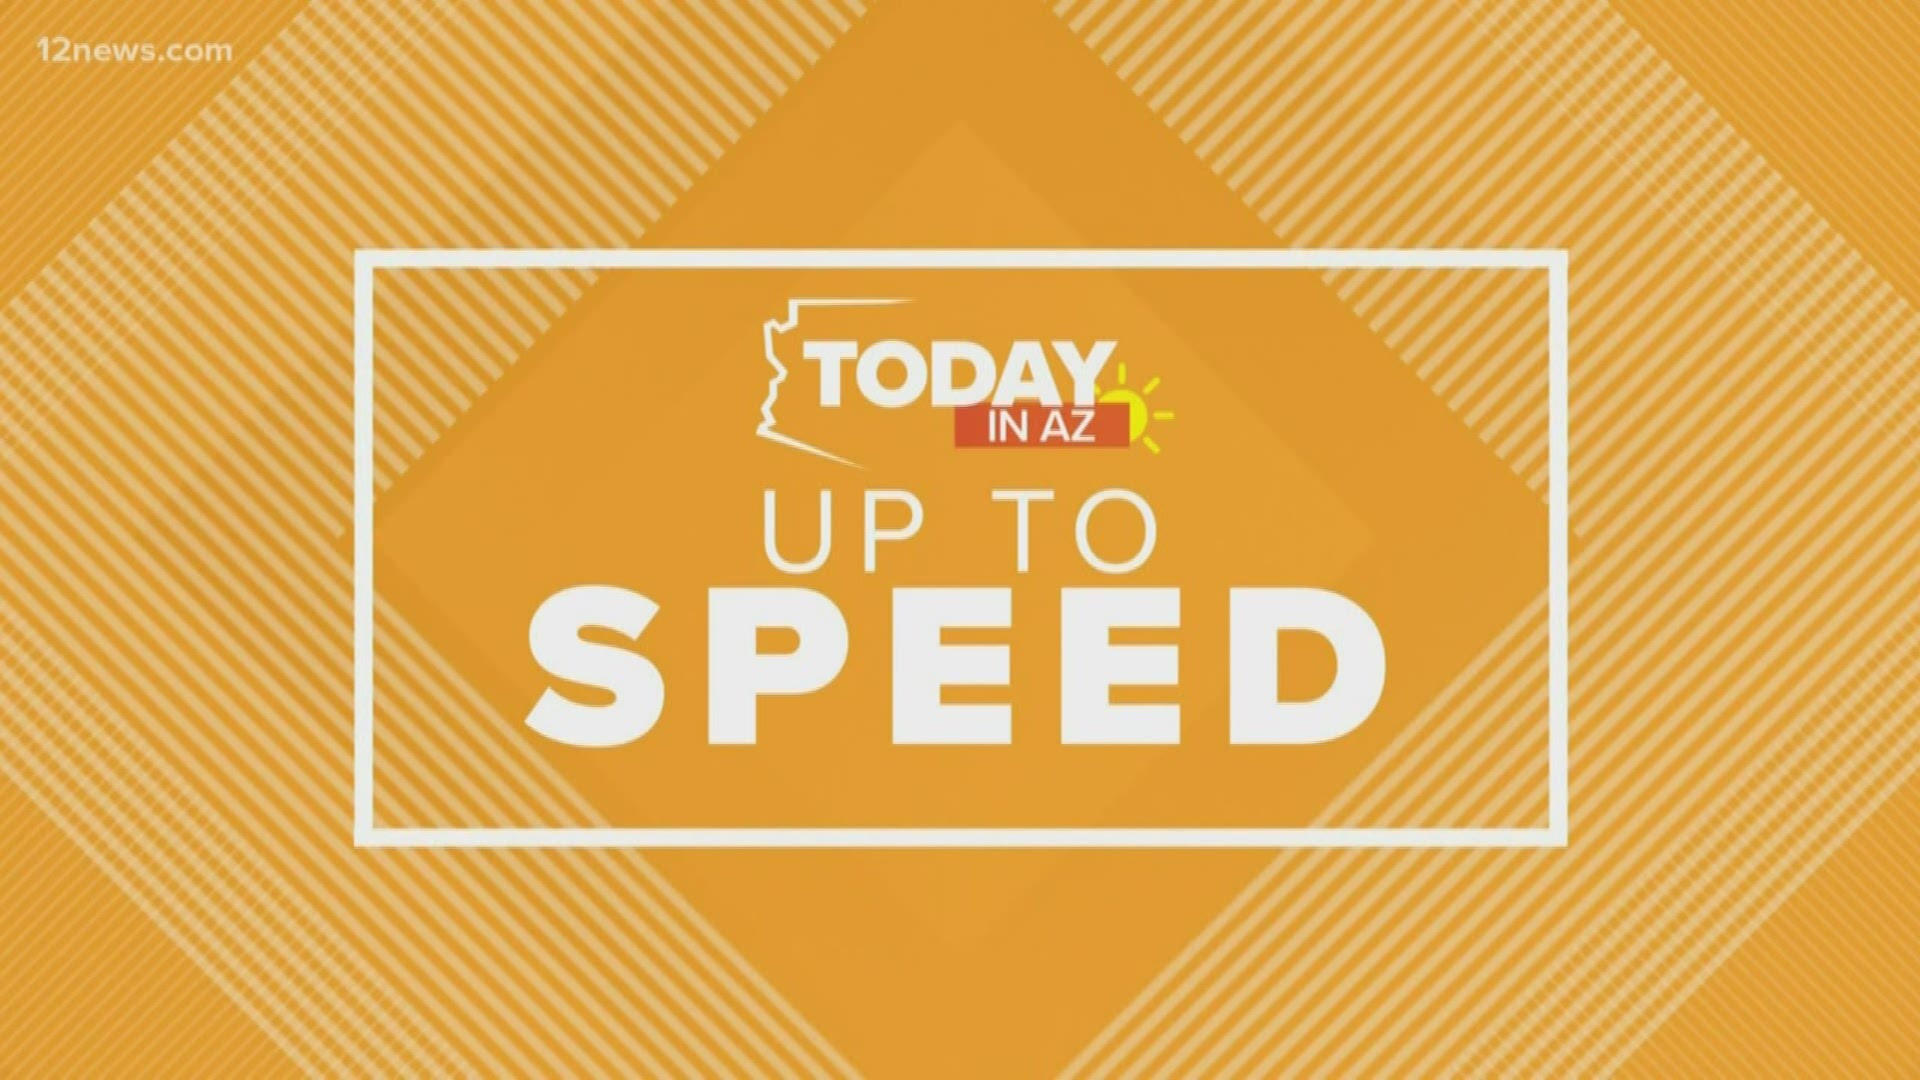 Get 'Up to Speed' on Wednesday morning.